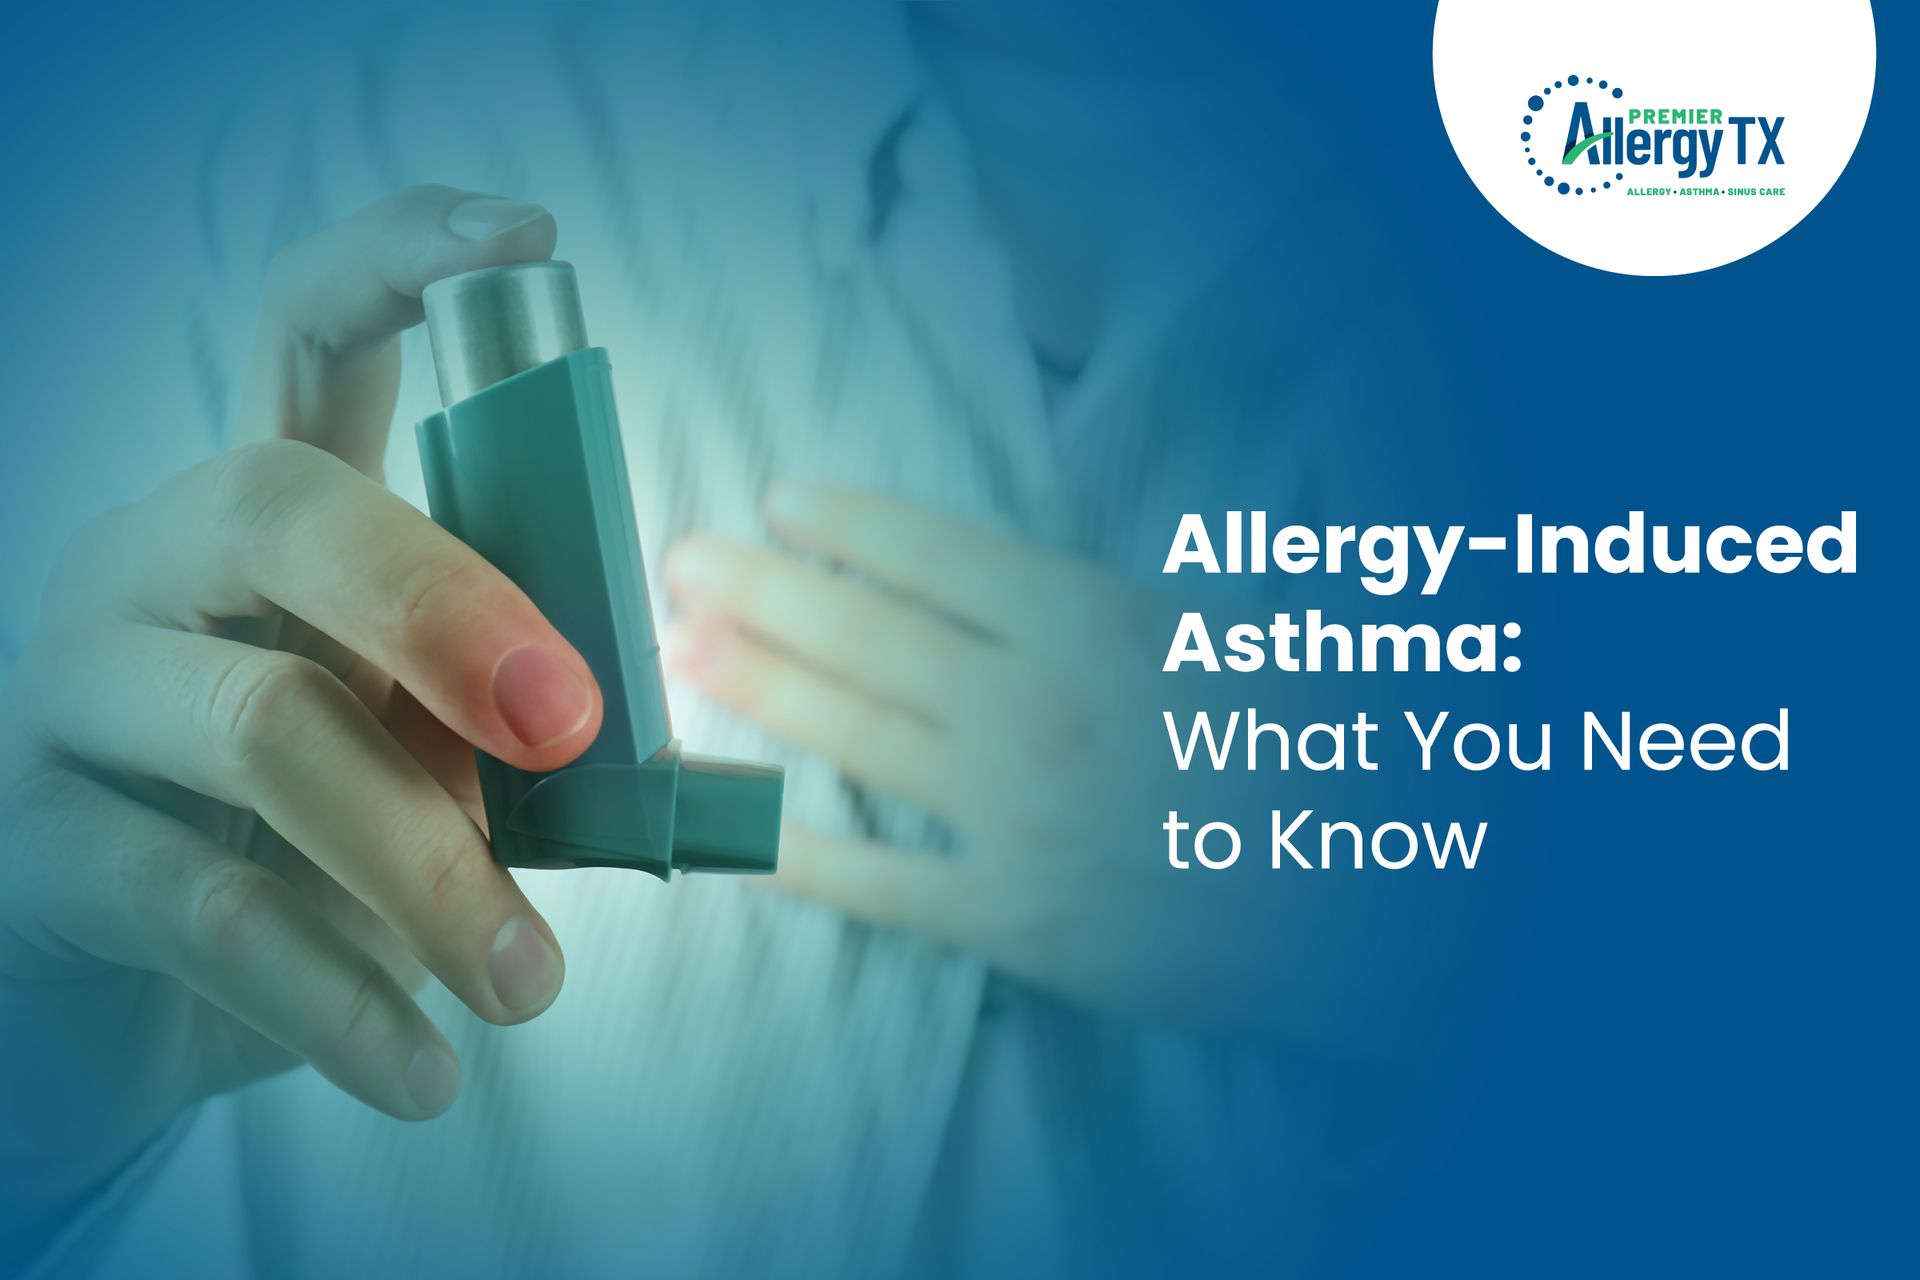 Allergy-Induced Asthma: What You Need to Know